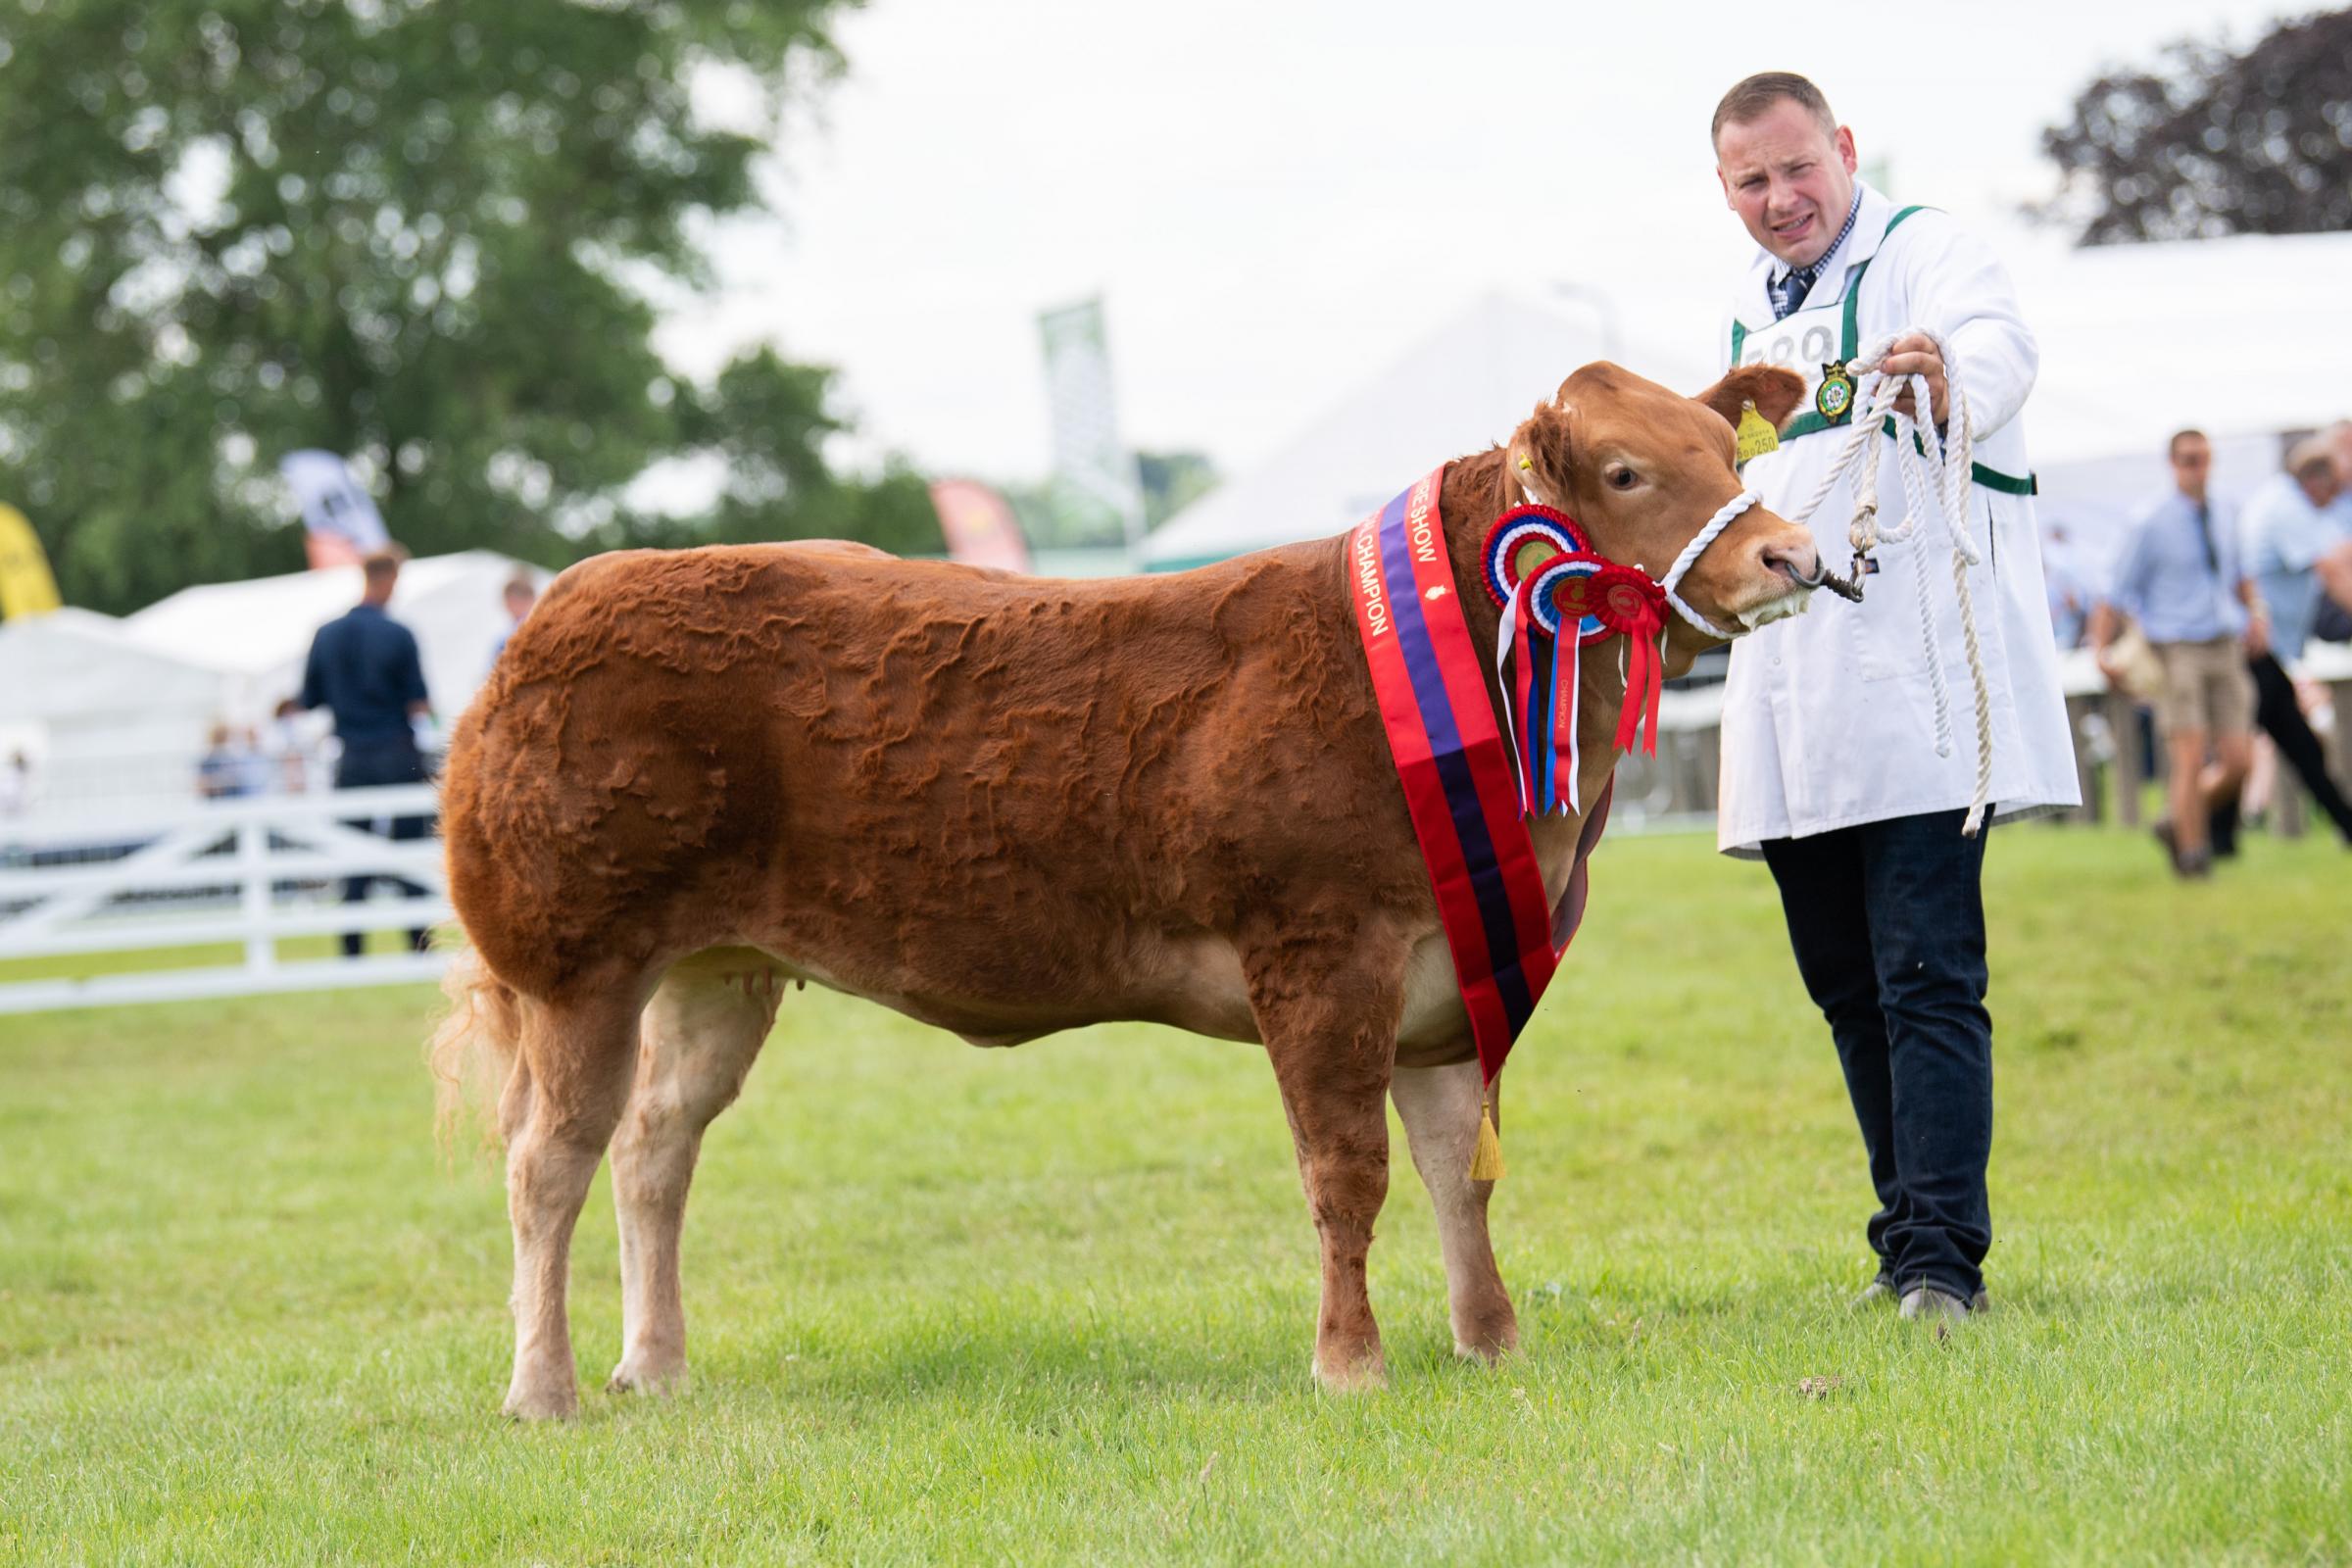 Harryman and Warriner took the top ticket in the Commercial beef section with the Limousin cross heifer Ref:RH140721092 Rob Haining / The Scottish Farmer...